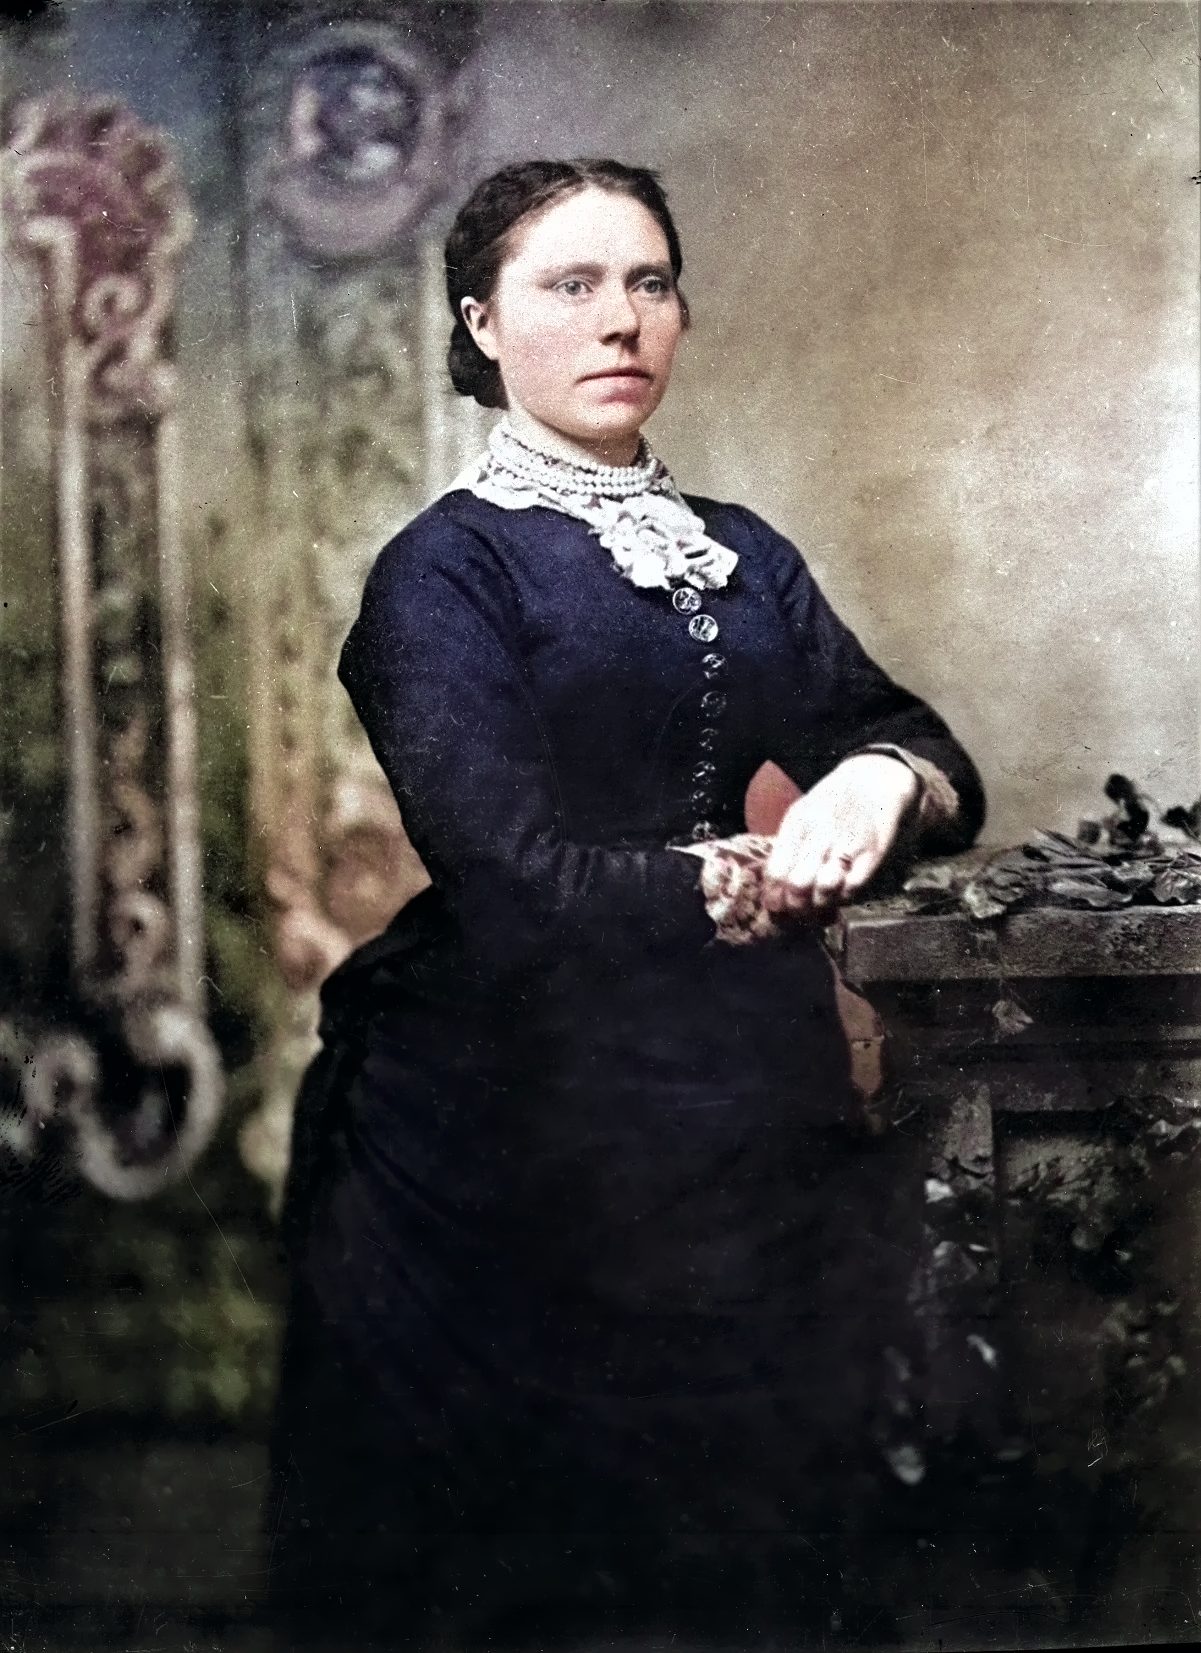 This is an image of a woman in an old-fashioned dress standing in front of a large wooden table. She is wearing a blue dress with a lace collar.